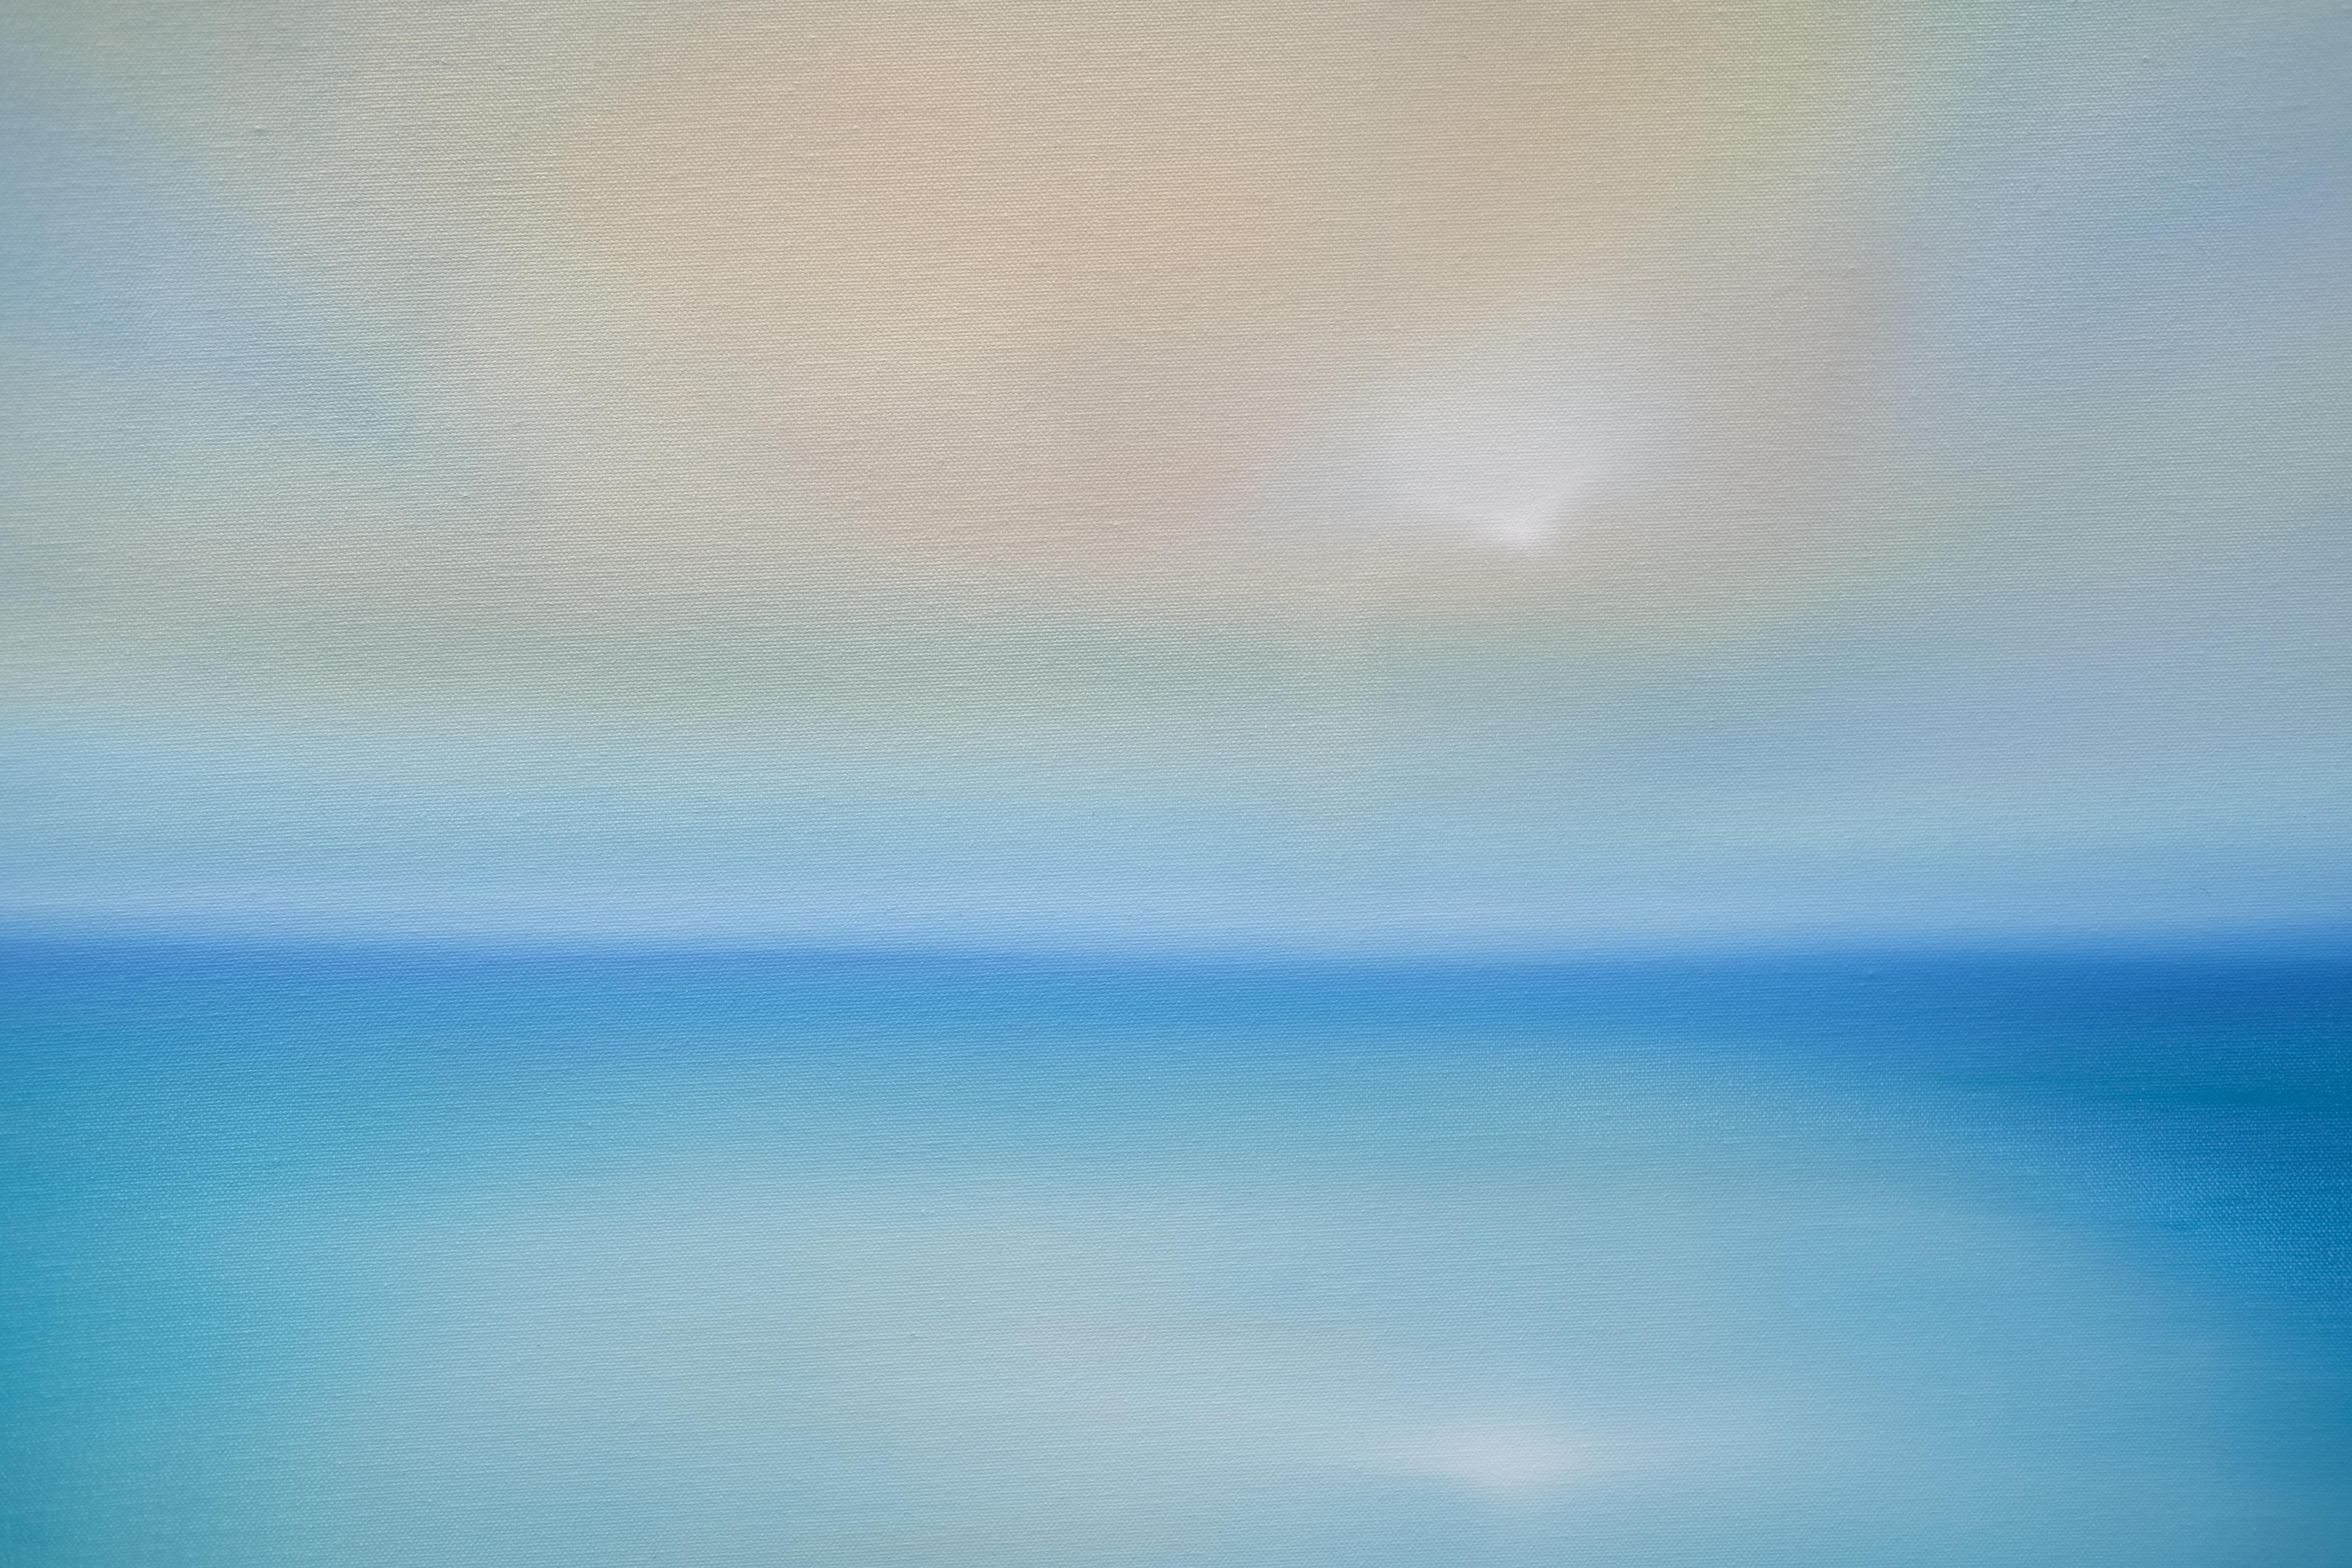 Calm Seas-original abstract seascape-ocean painting for sale-contemporary Art - Painting de Jonathan Speed